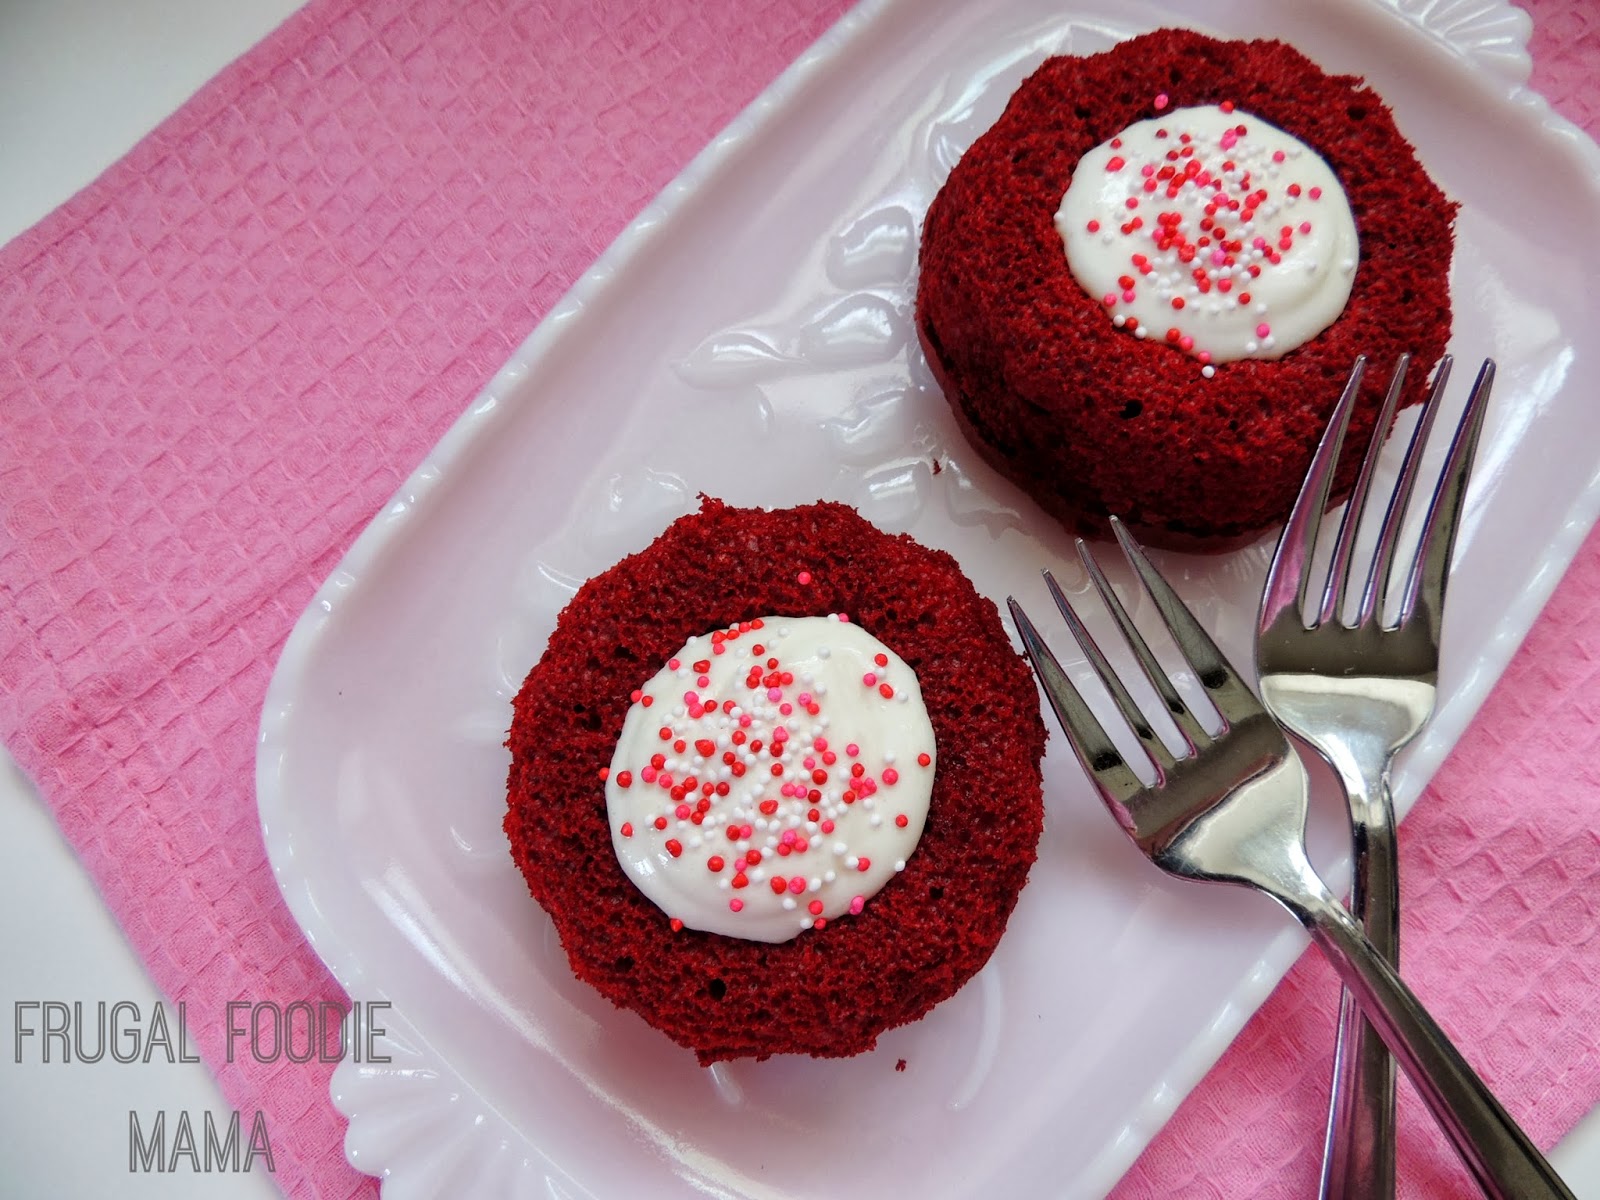 These easy Red Velvet Molten Cakes with an ooey, gooey cream cheese center start with a red velvet cake mix and are the perfect Valentine's Day dessert.